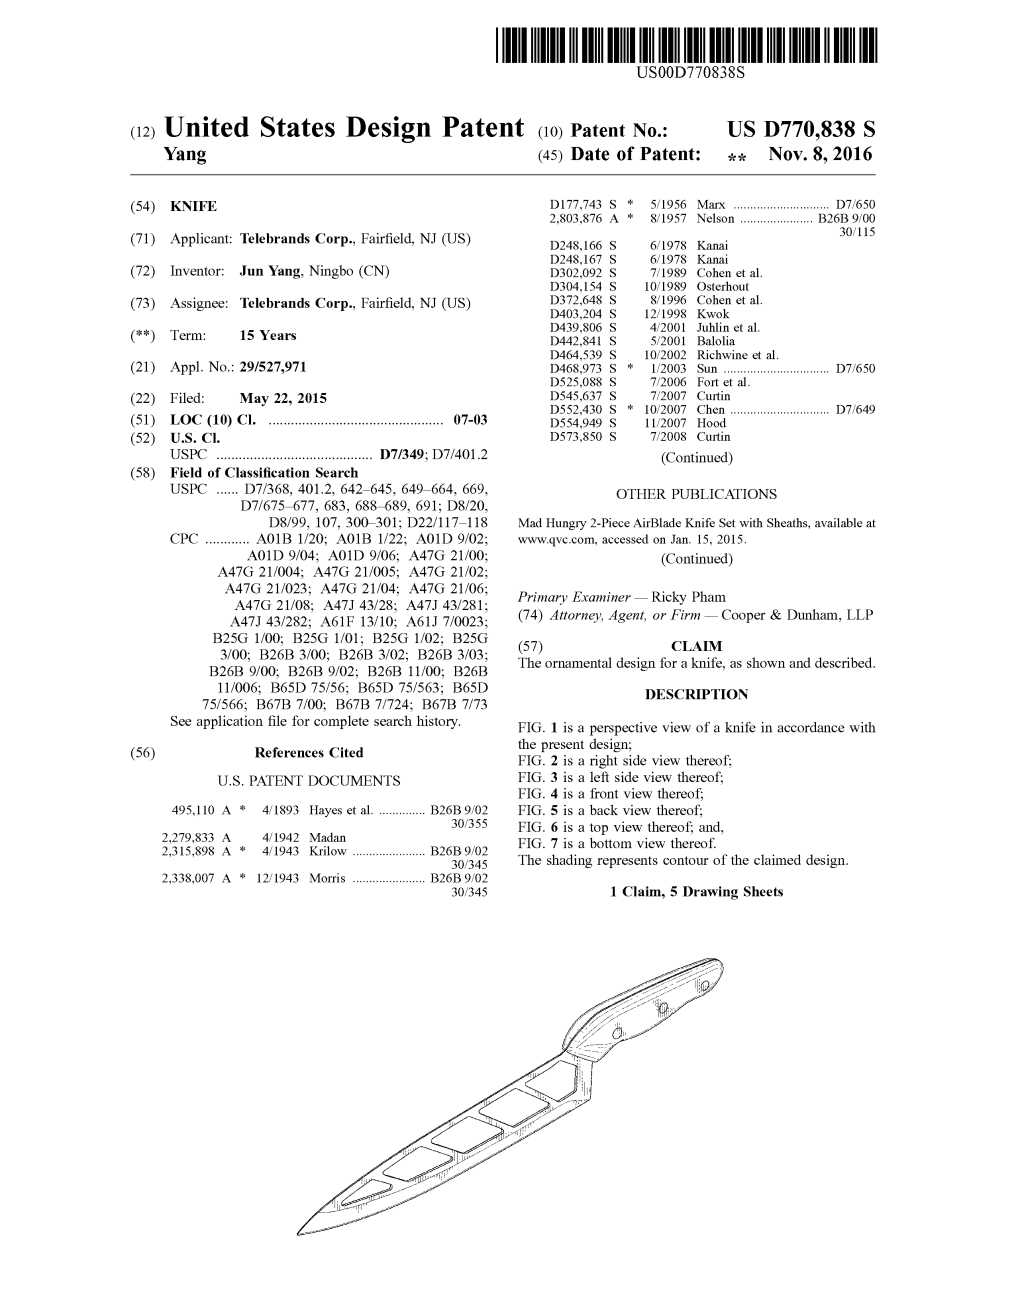 (12) United States Design Patent (10) Patent No.: US D770,838 S Yang (45) Date of Patent